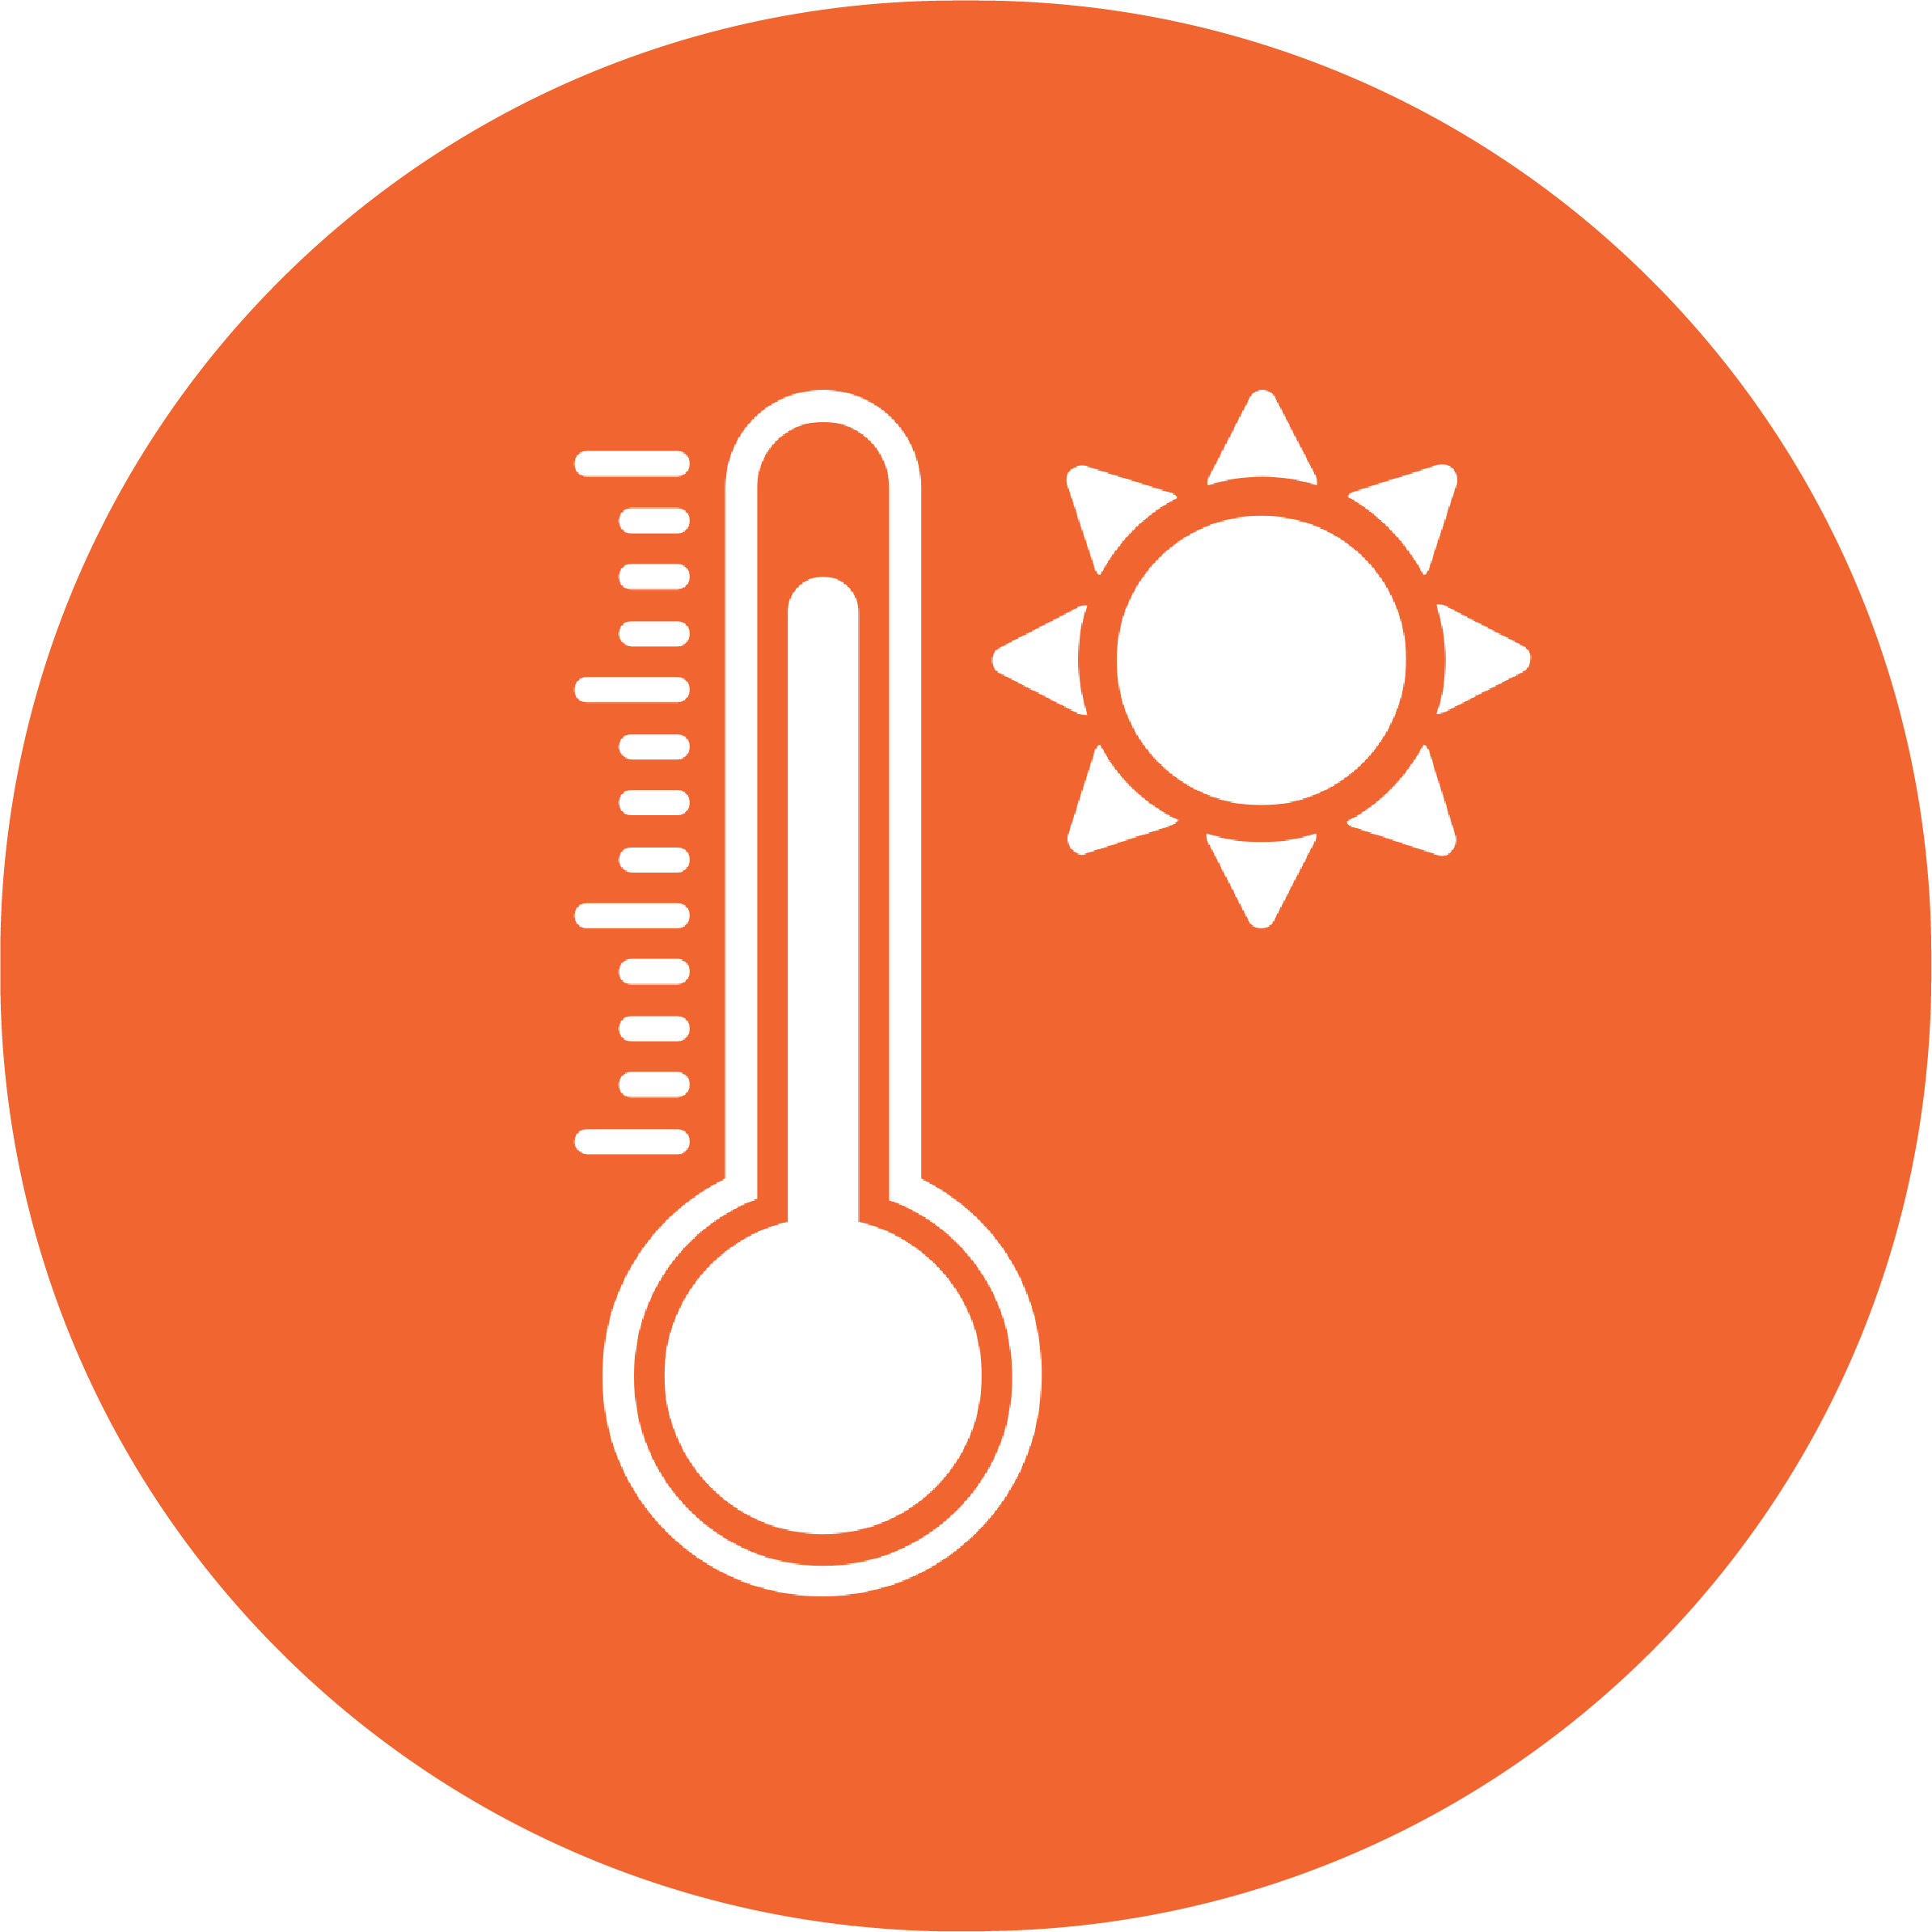 Navigation icon with thermometer and sun representing heat-related illnesses